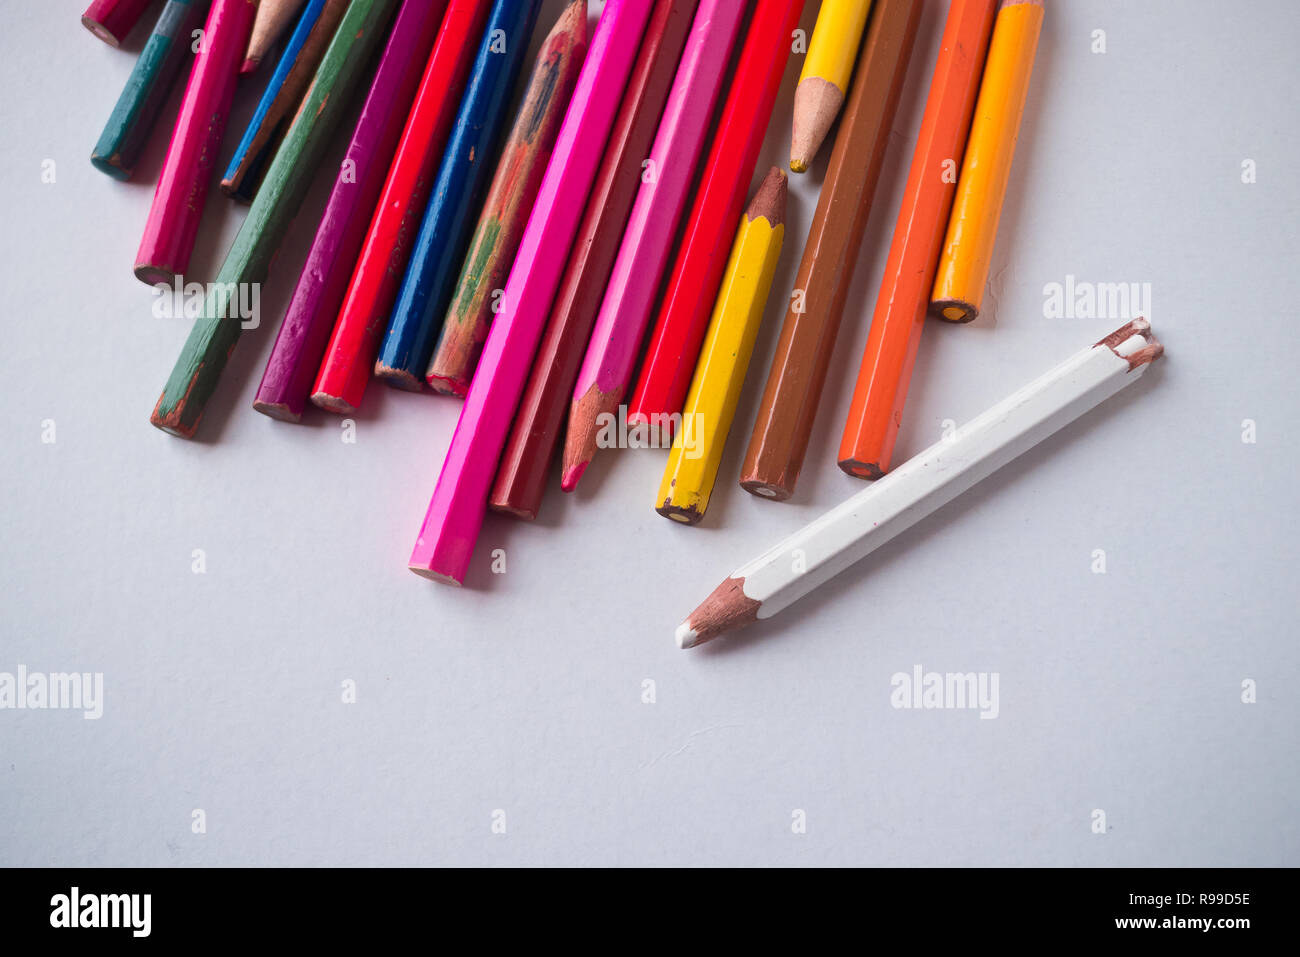 the colored pencils used on a white background. Stock Photo